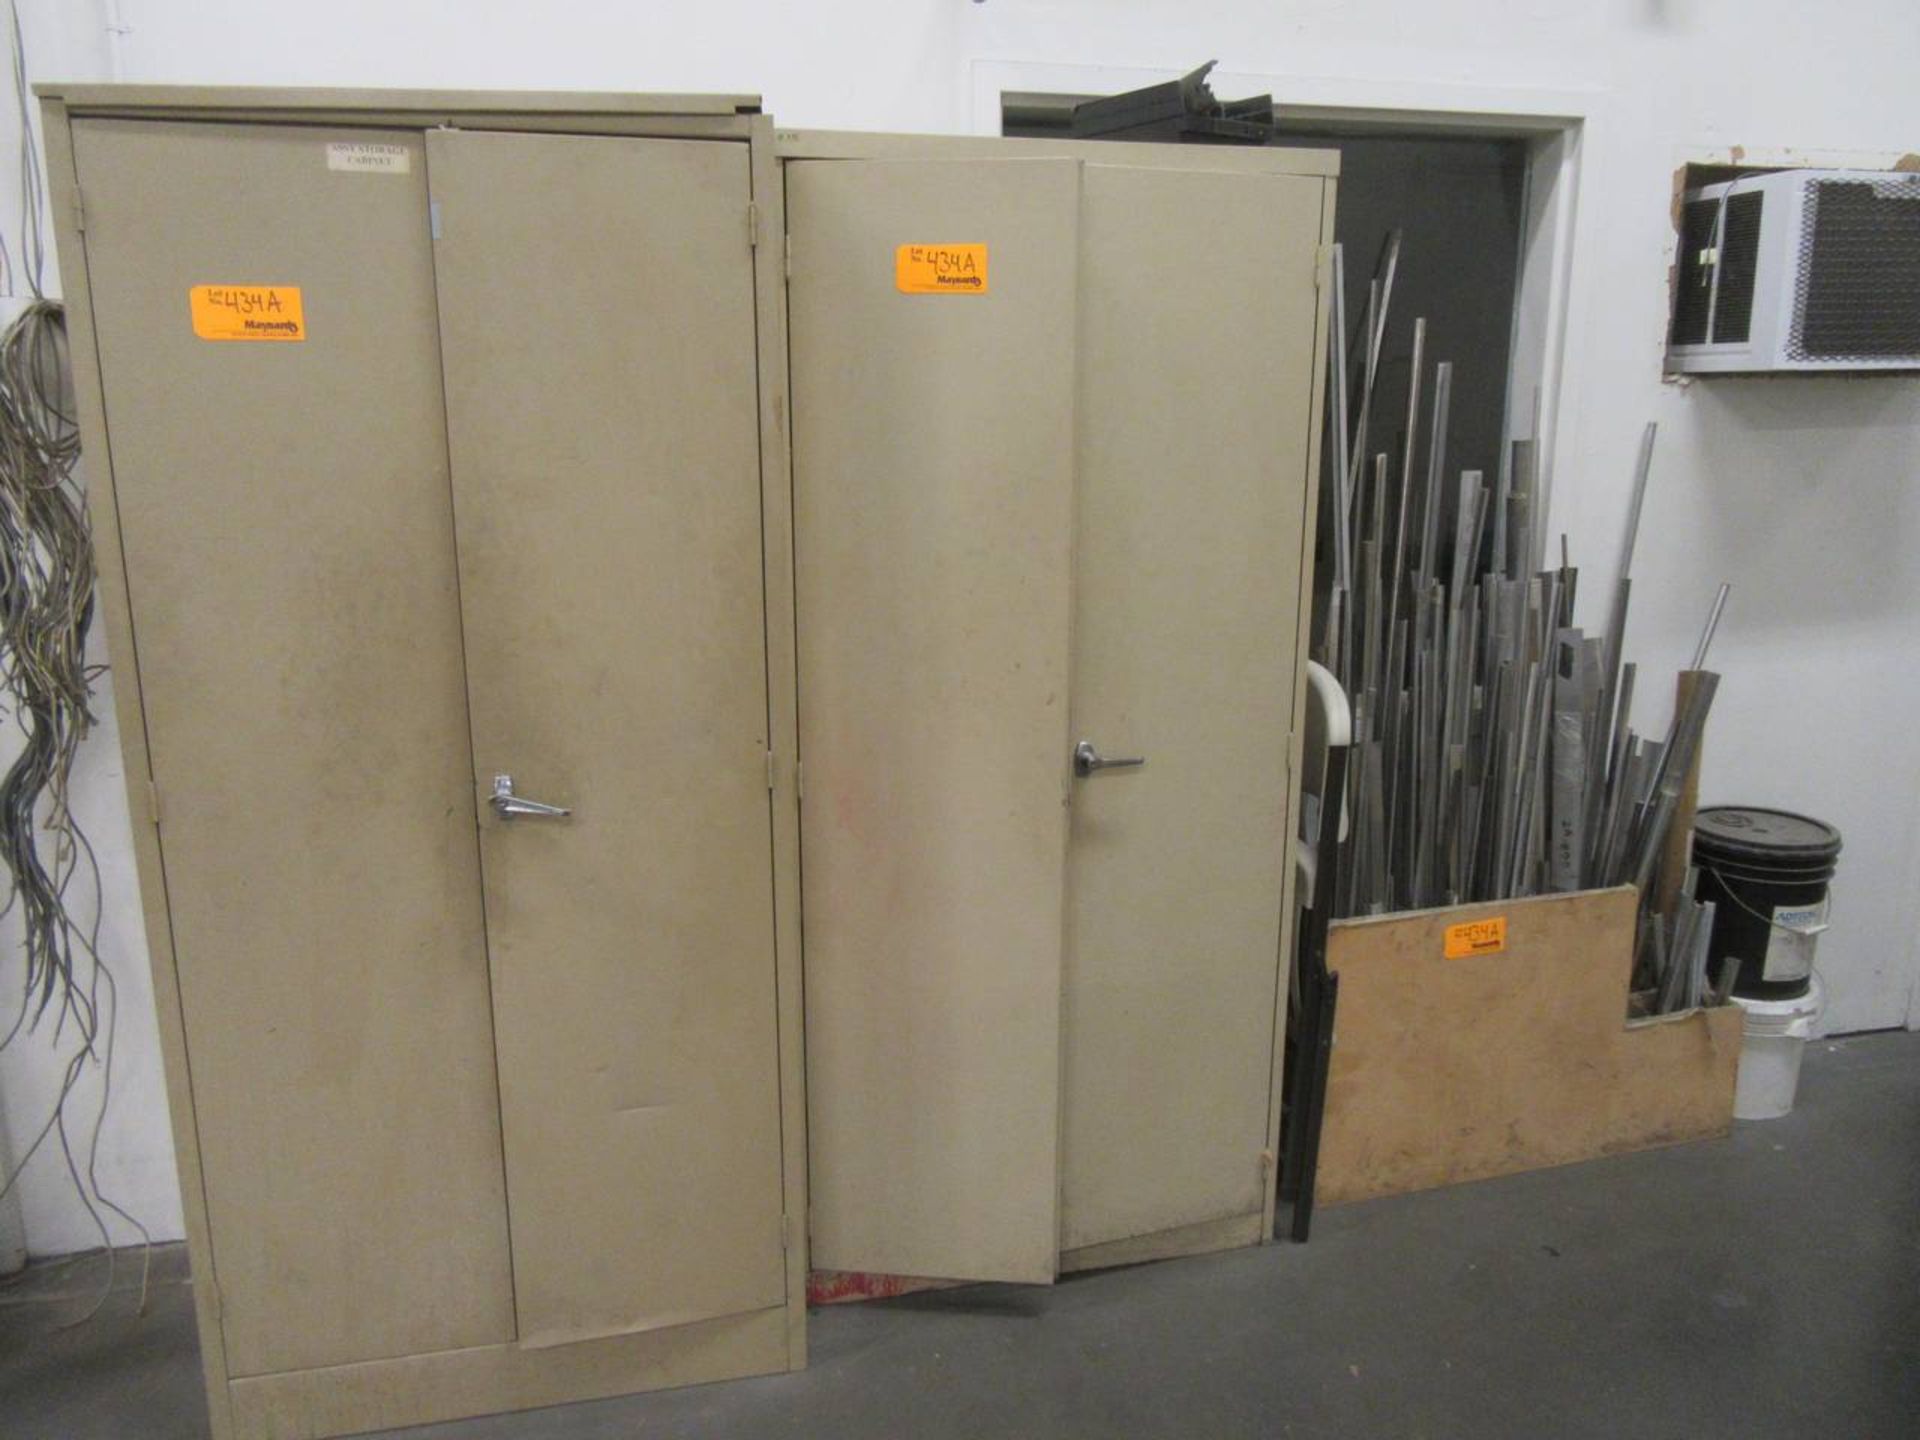 (2) Storage Cabinets with contents